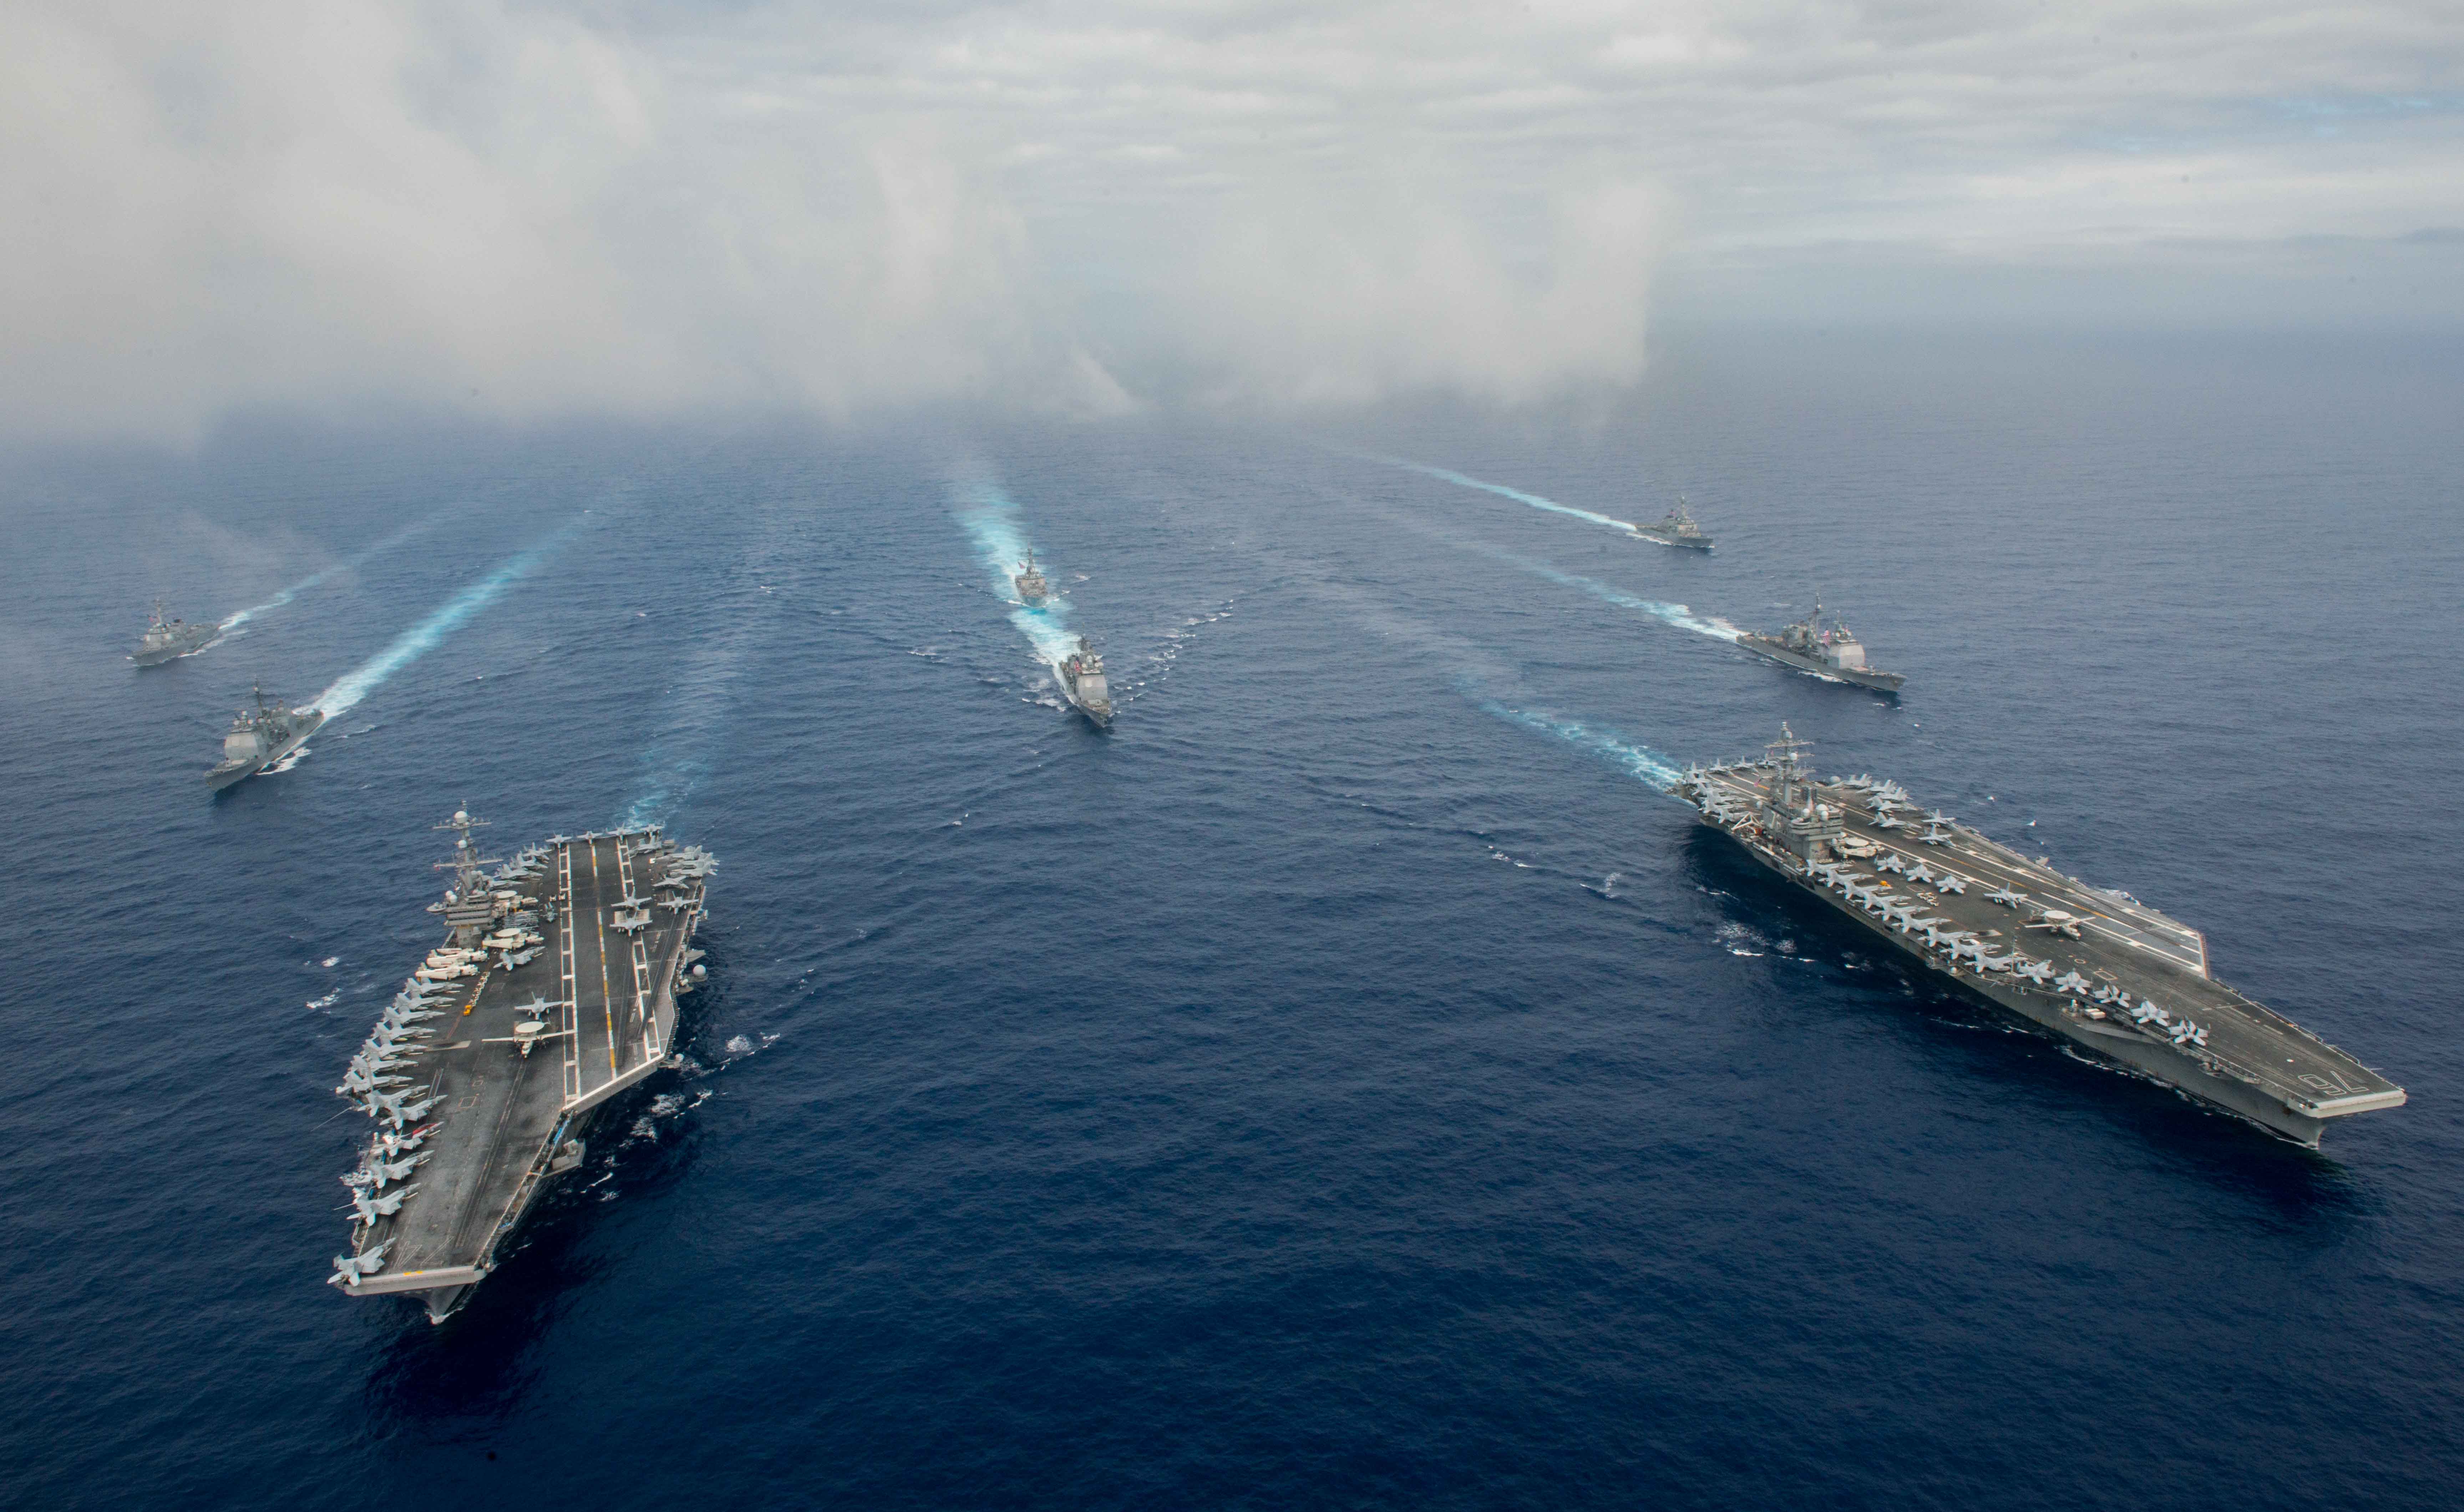 The Nimitz-class aircraft carriers USS John C. Stennis (CVN 74), left, and USS Ronald Reagan (CVN 76) conduct dual aircraft carrier strike group operations in the U.S. 7th Fleet area of operations in support of security and stability in the Indo-Asia-Pacific. US Navy photo.